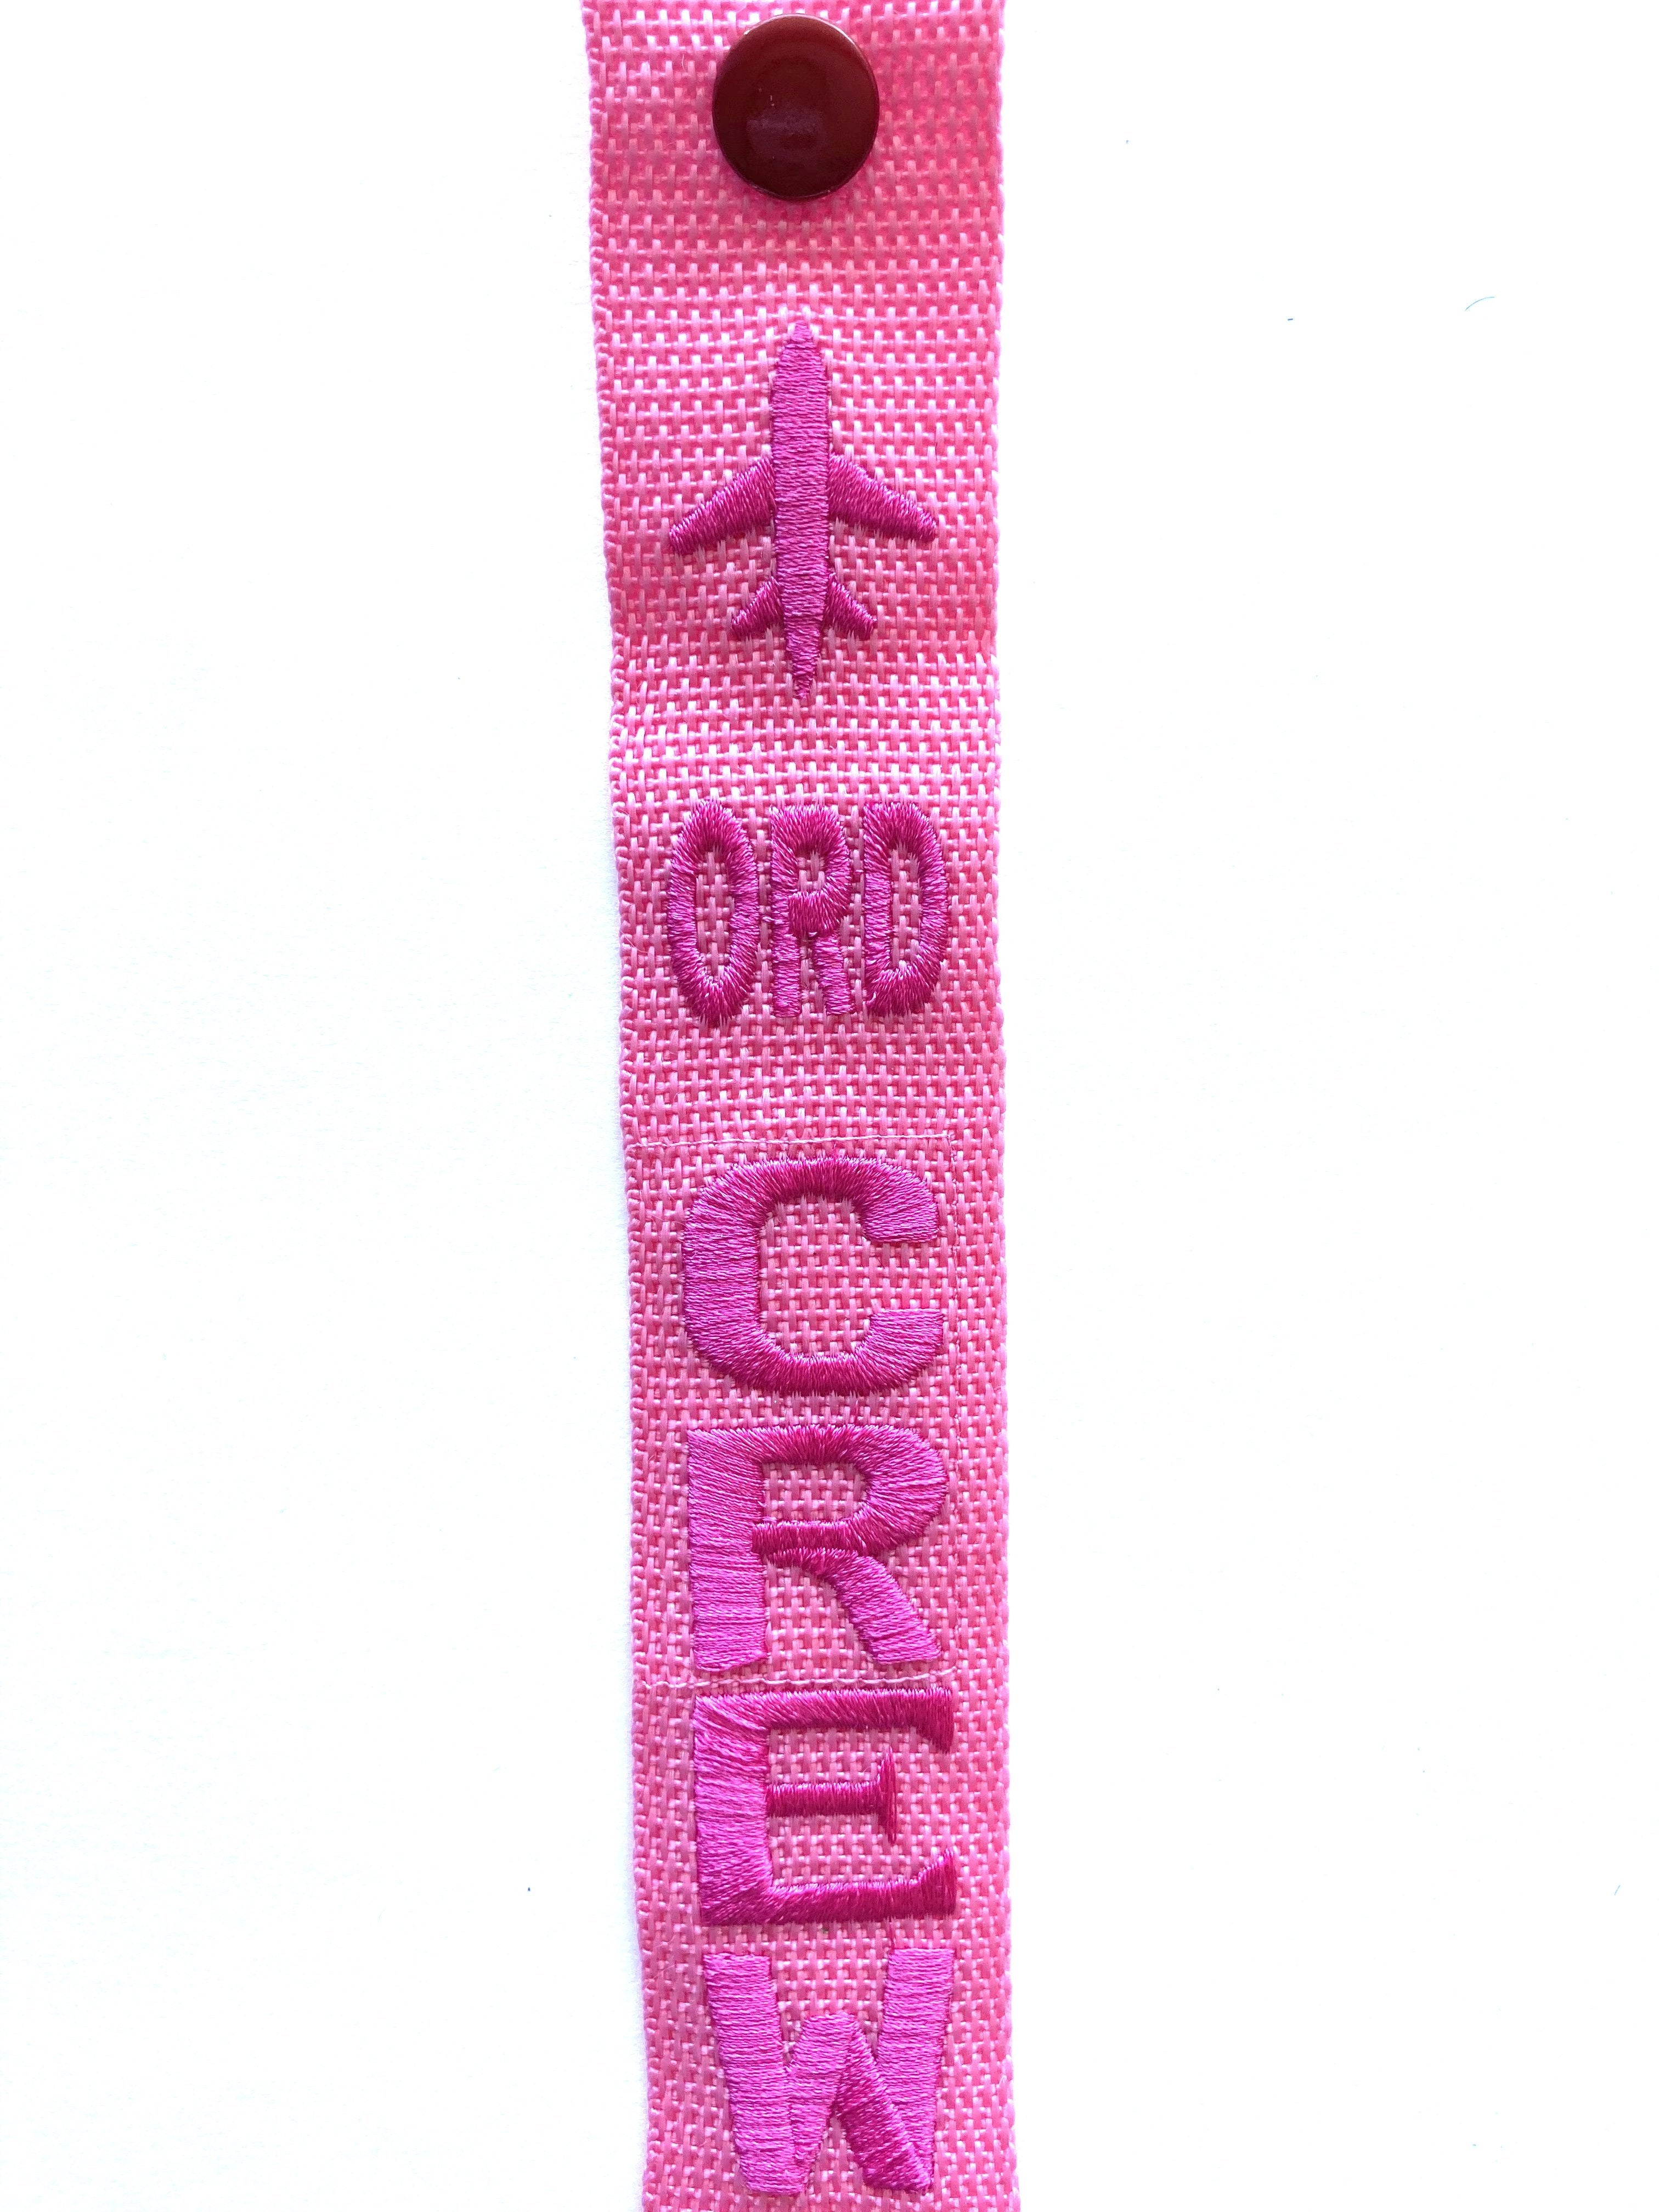 CREW Luggage Tag - ORD Pink on Pink